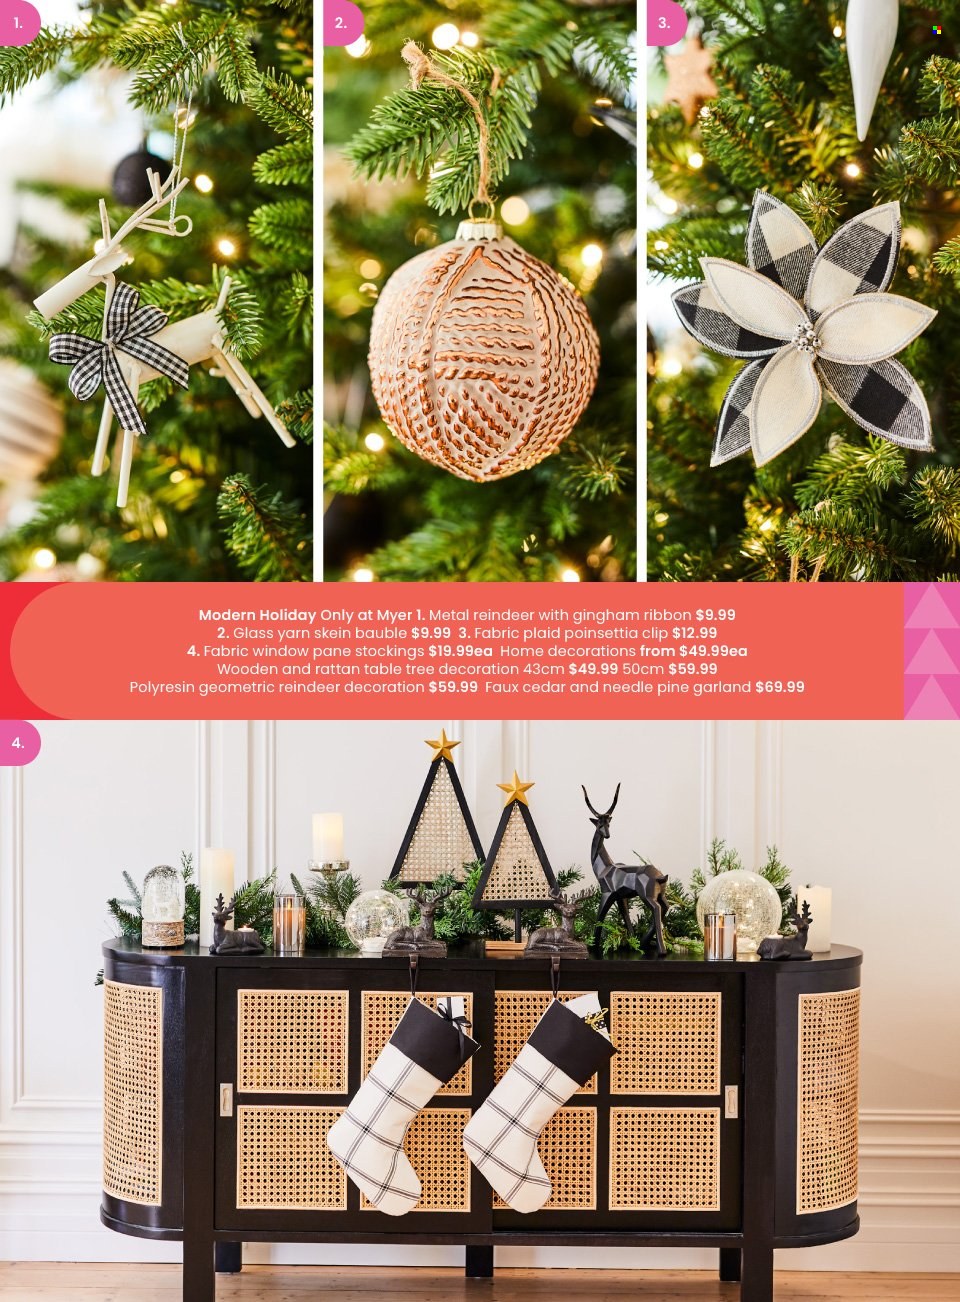 thumbnail - Myer Catalogue - Sales products - bauble, ribbon, knitting wool, reindeer, pine garland, tree decoration, garland, stockings. Page 21.